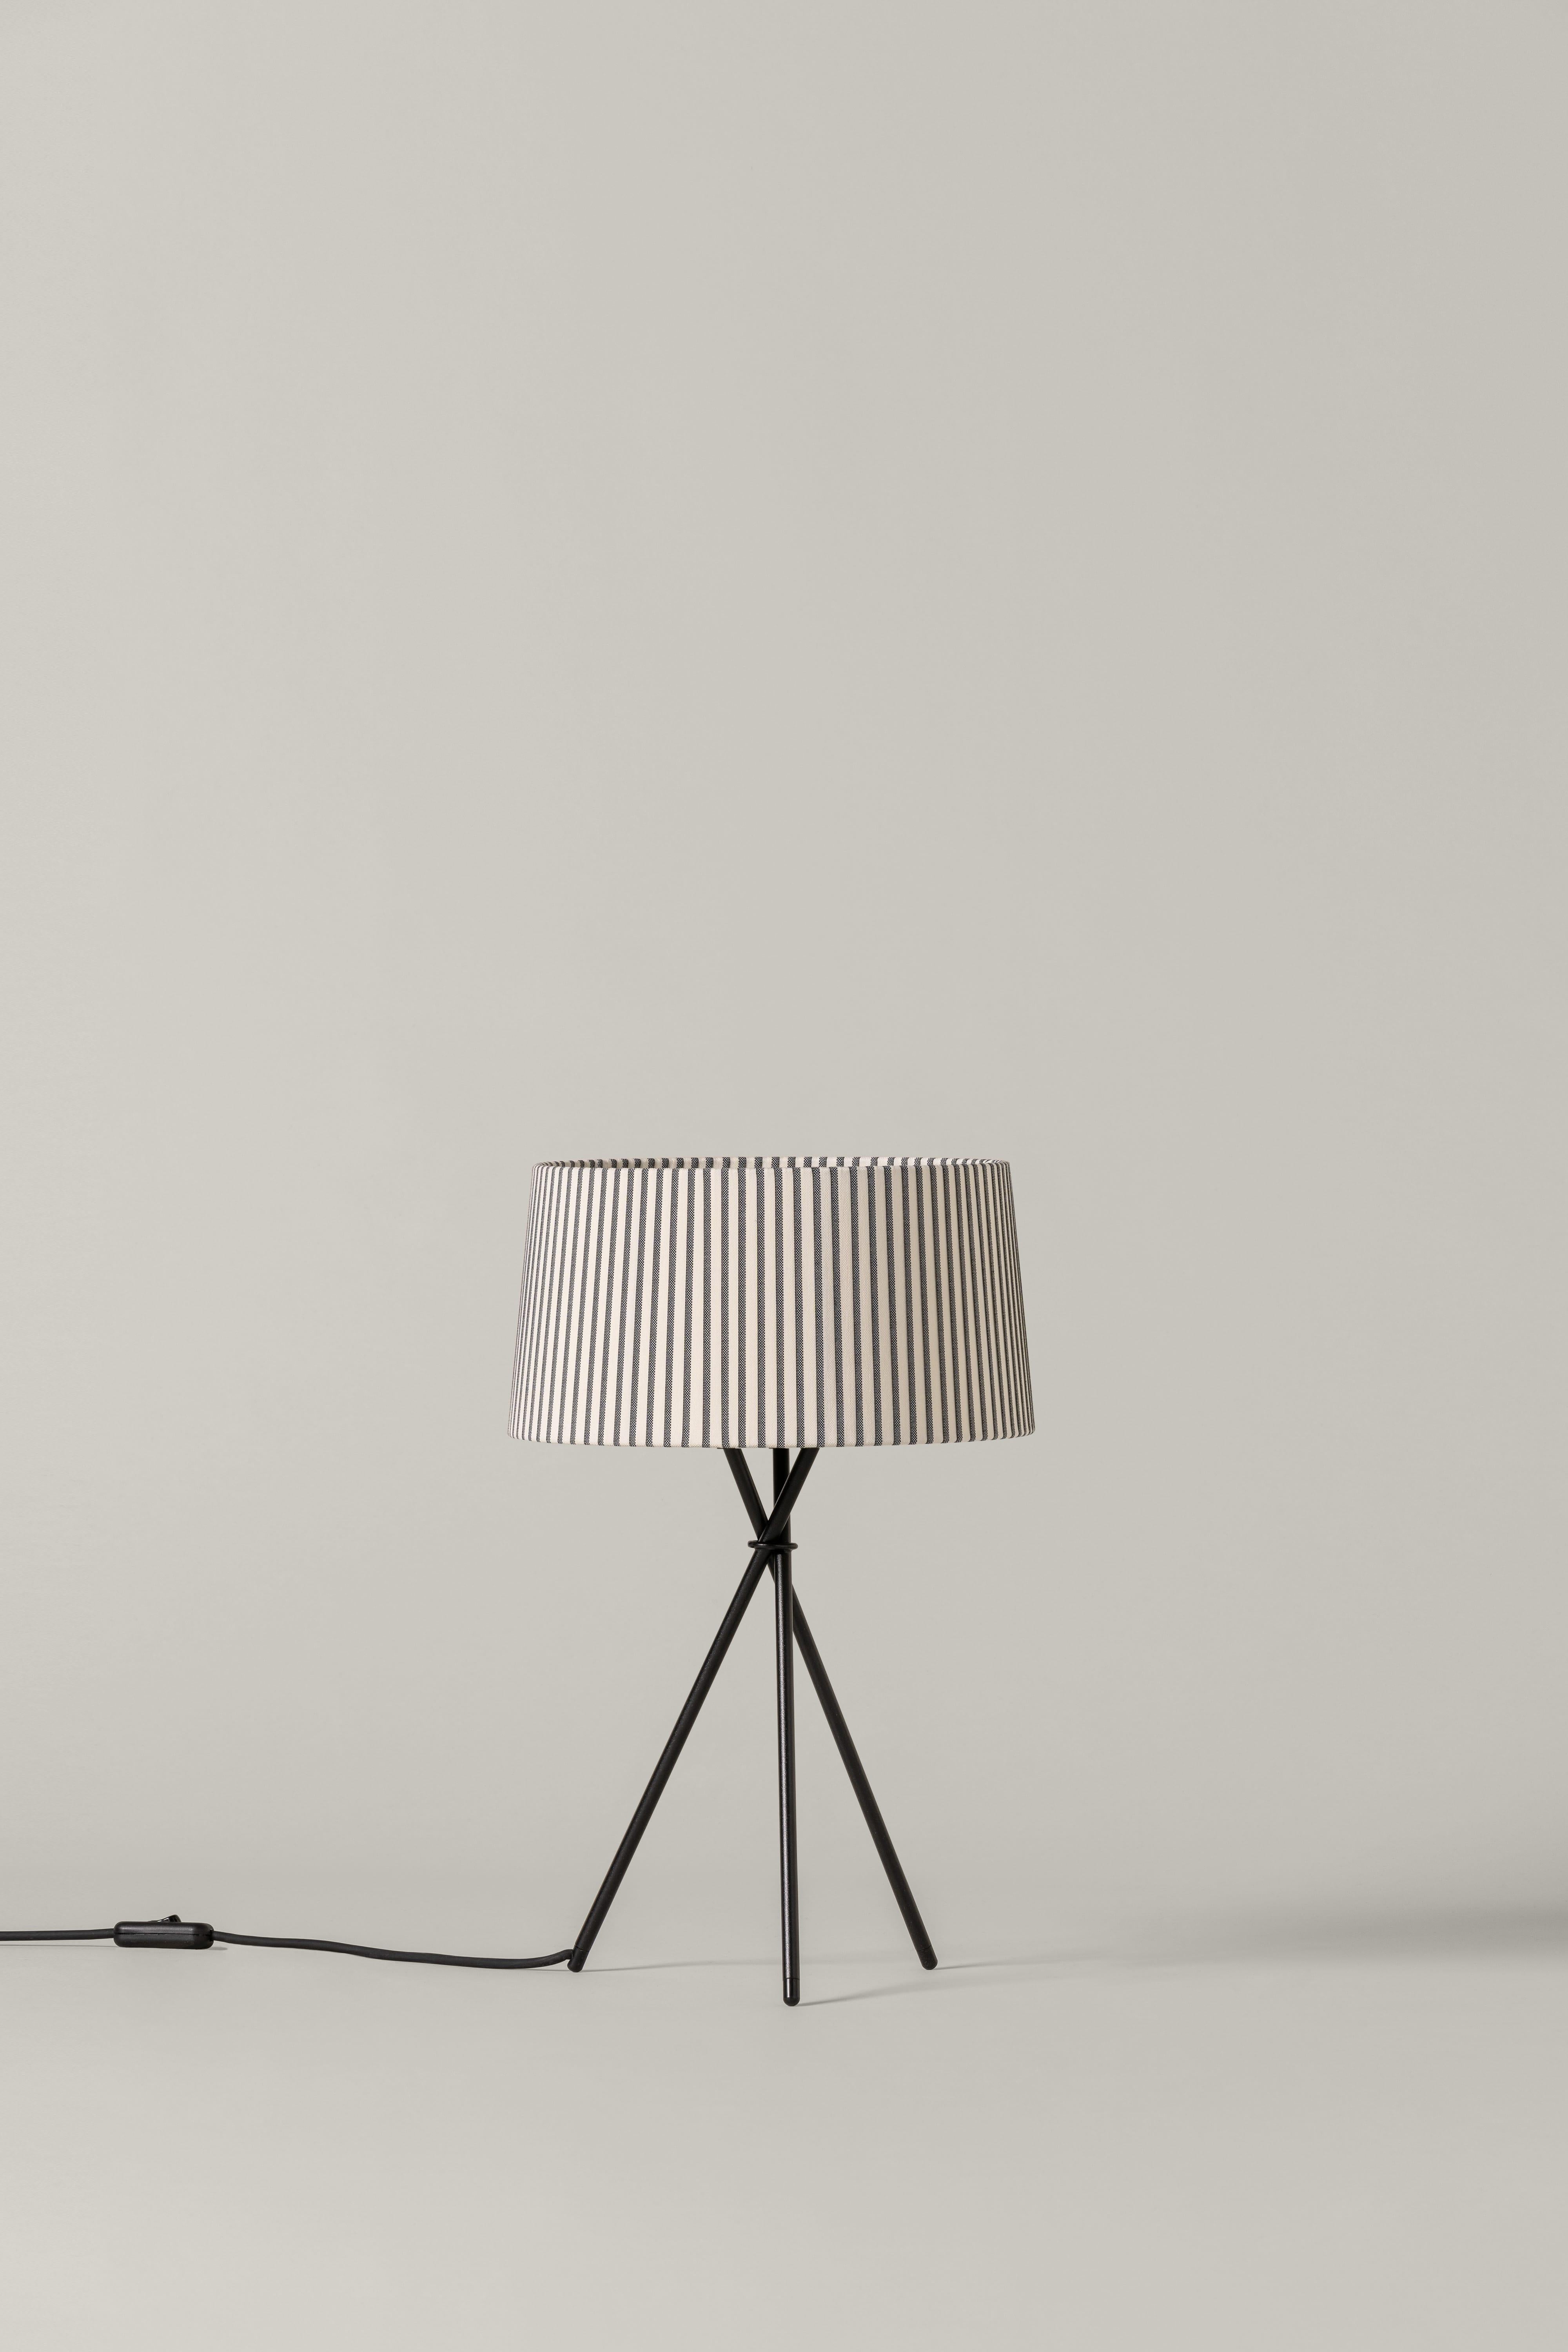 Bretona trípode M3 table lamp by Santa & Cole
Dimensions: D 31 x H 50 cm
Materials: Metal, bretona stripe ribbon lampshade.
Available in other colors finishes.

Trípode humanises neutral spaces with its colourful and functional sobriety. The